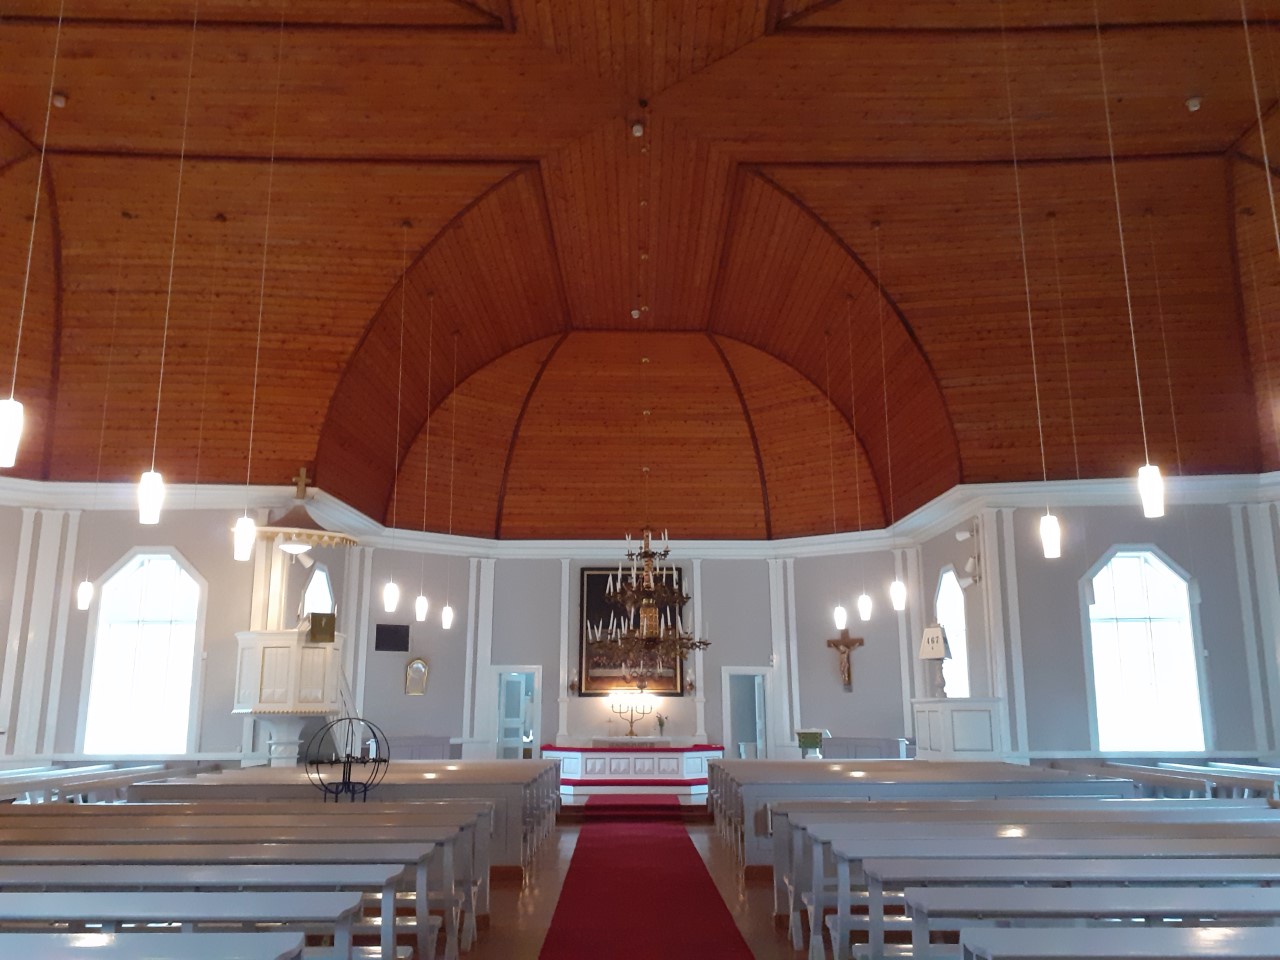 Säräisniemi Church form the inside. Light benches and walls, red-brown ceiling. 